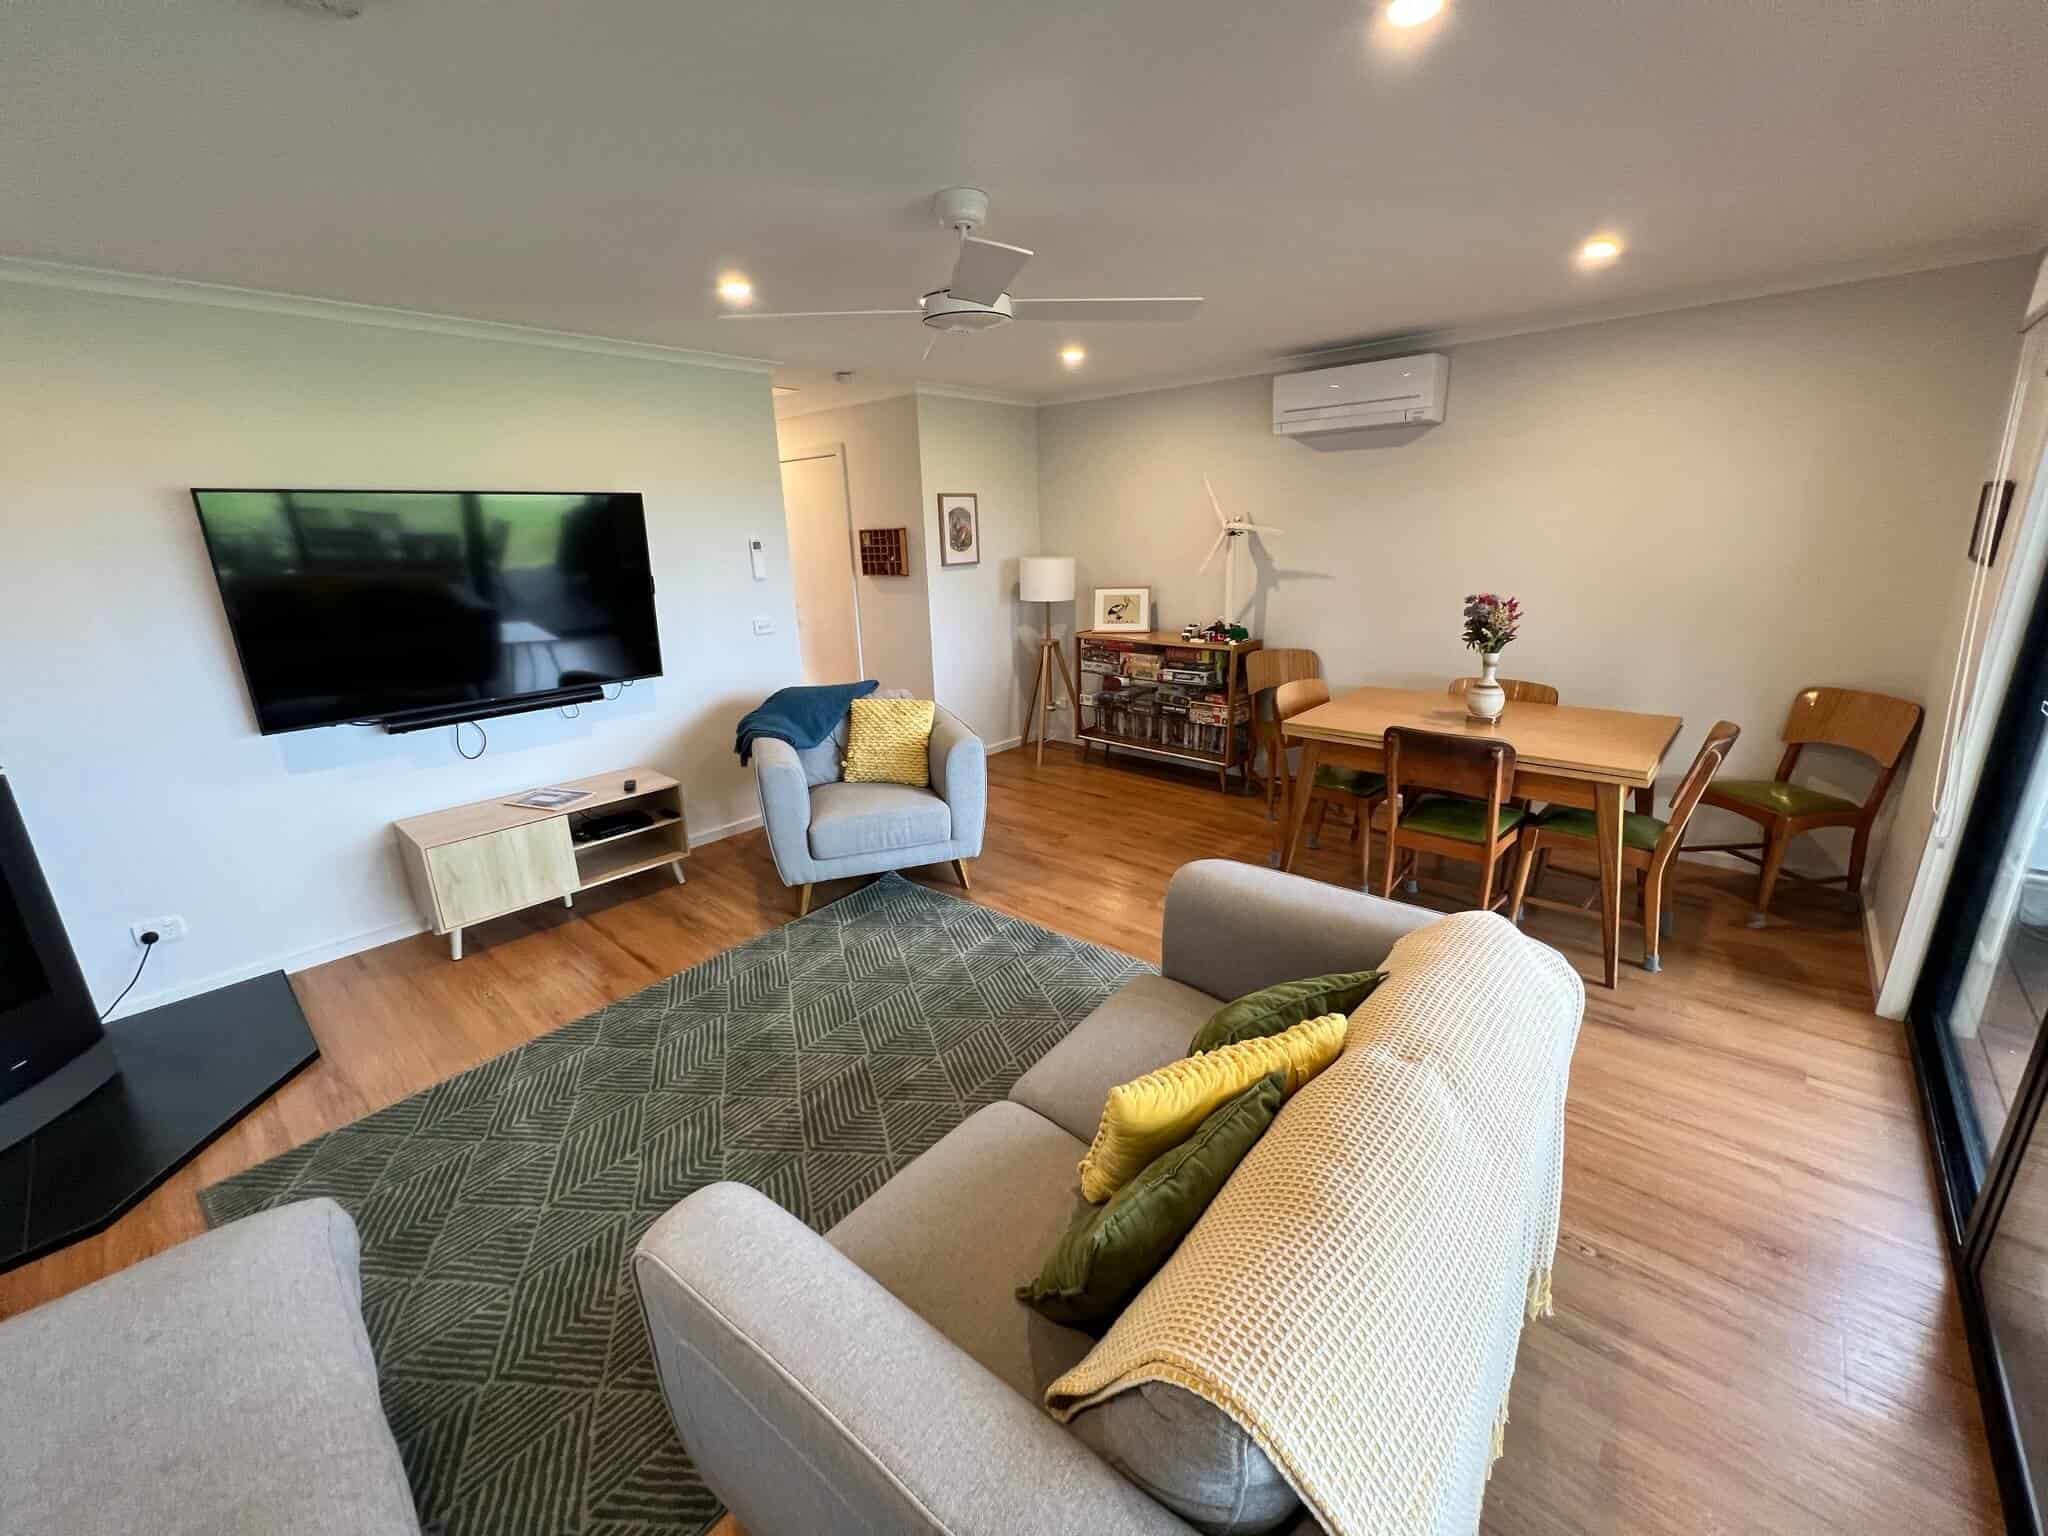 Upstairs lounge room with TV, wood heater and board games